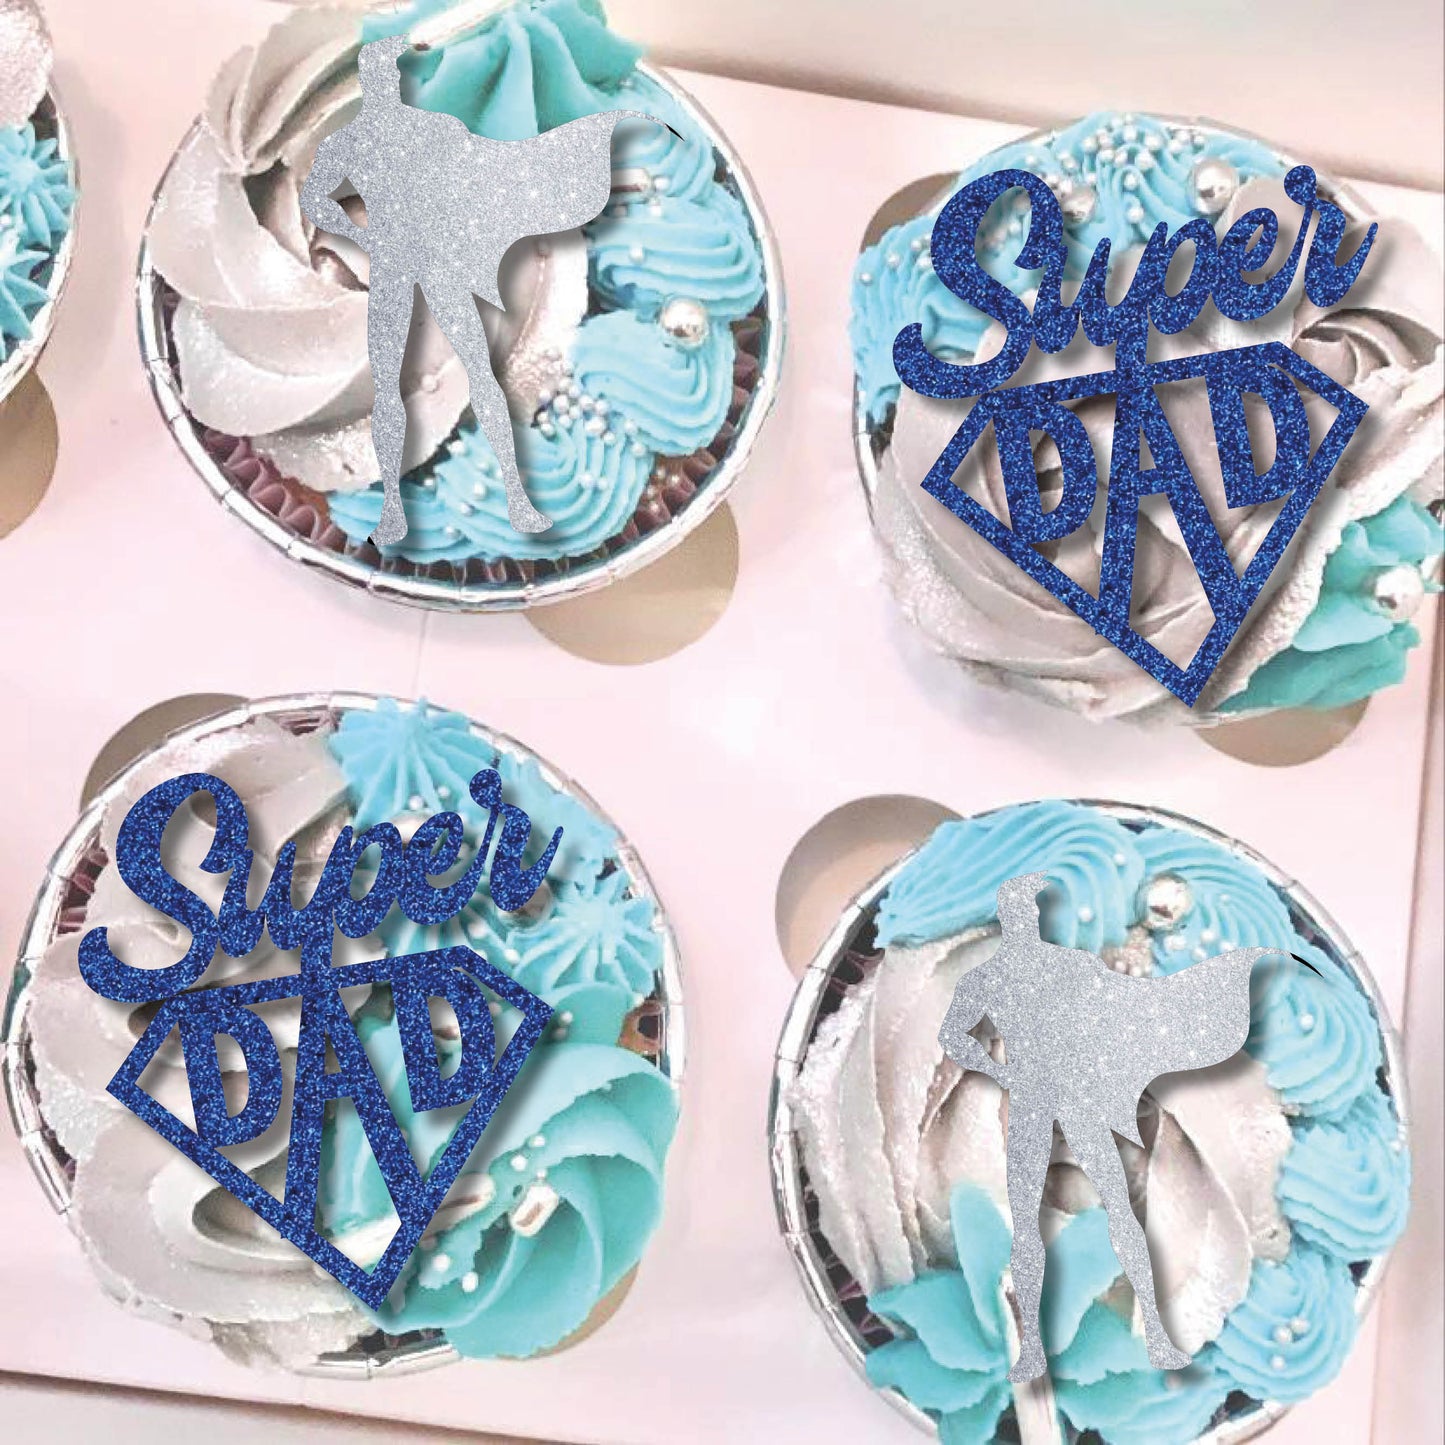 SUPER DAD - CUPCAKE TOPPERS